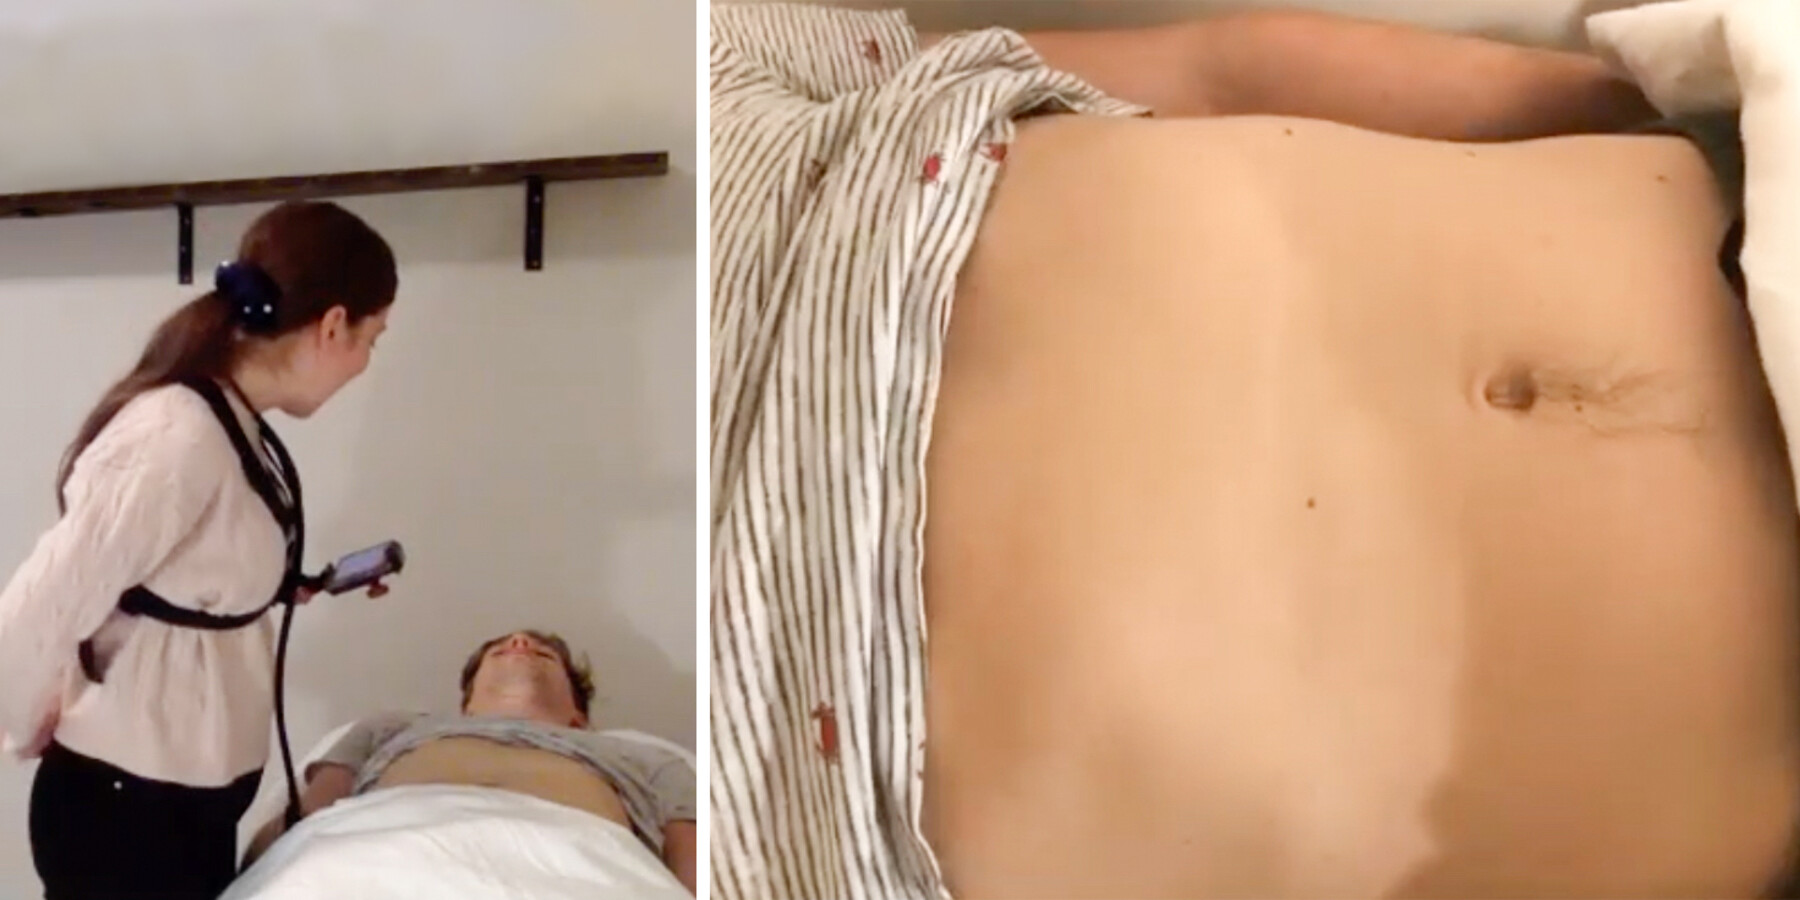 Left: A person wears a smartphone mounted on their chest to examine a patient; Right: a view from the smartphone camera.  